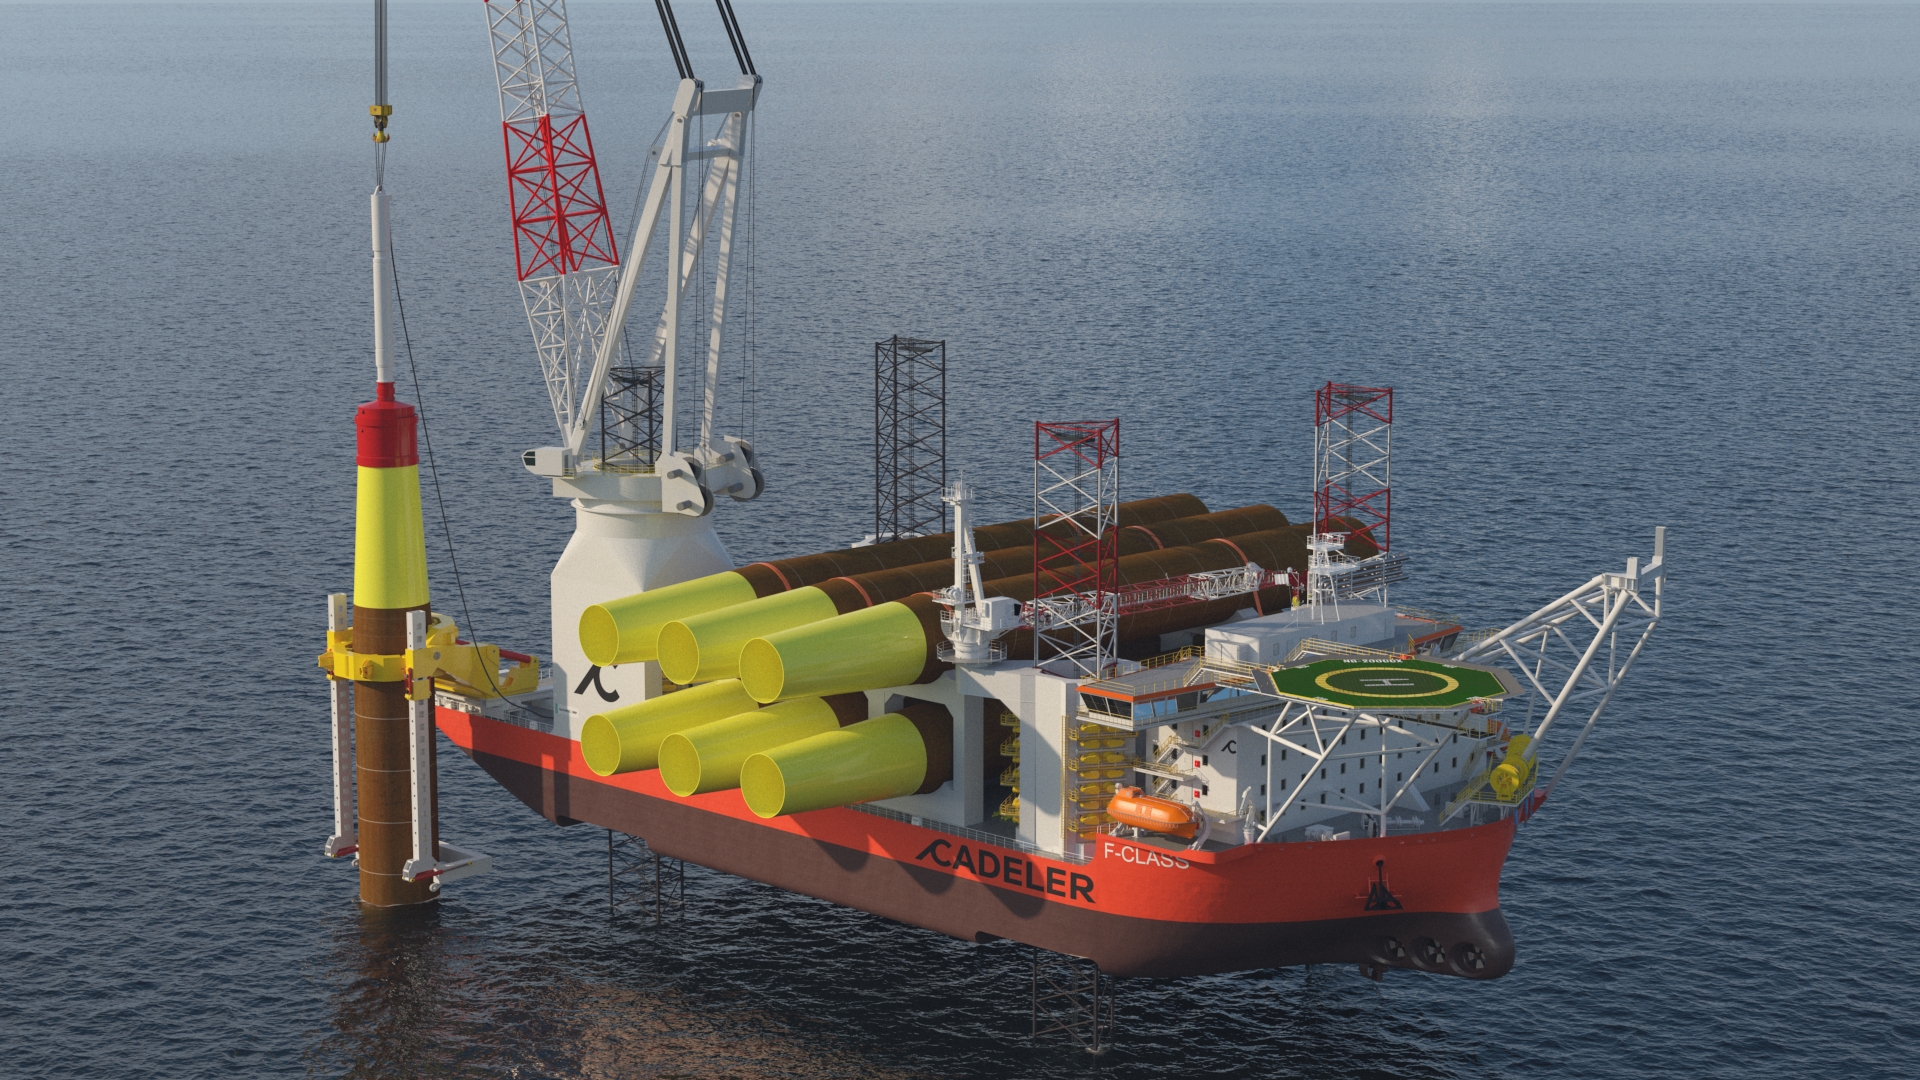 NOV awarded equipment package and design license contracts for Cadeler’s first jack-up foundation installation vessel